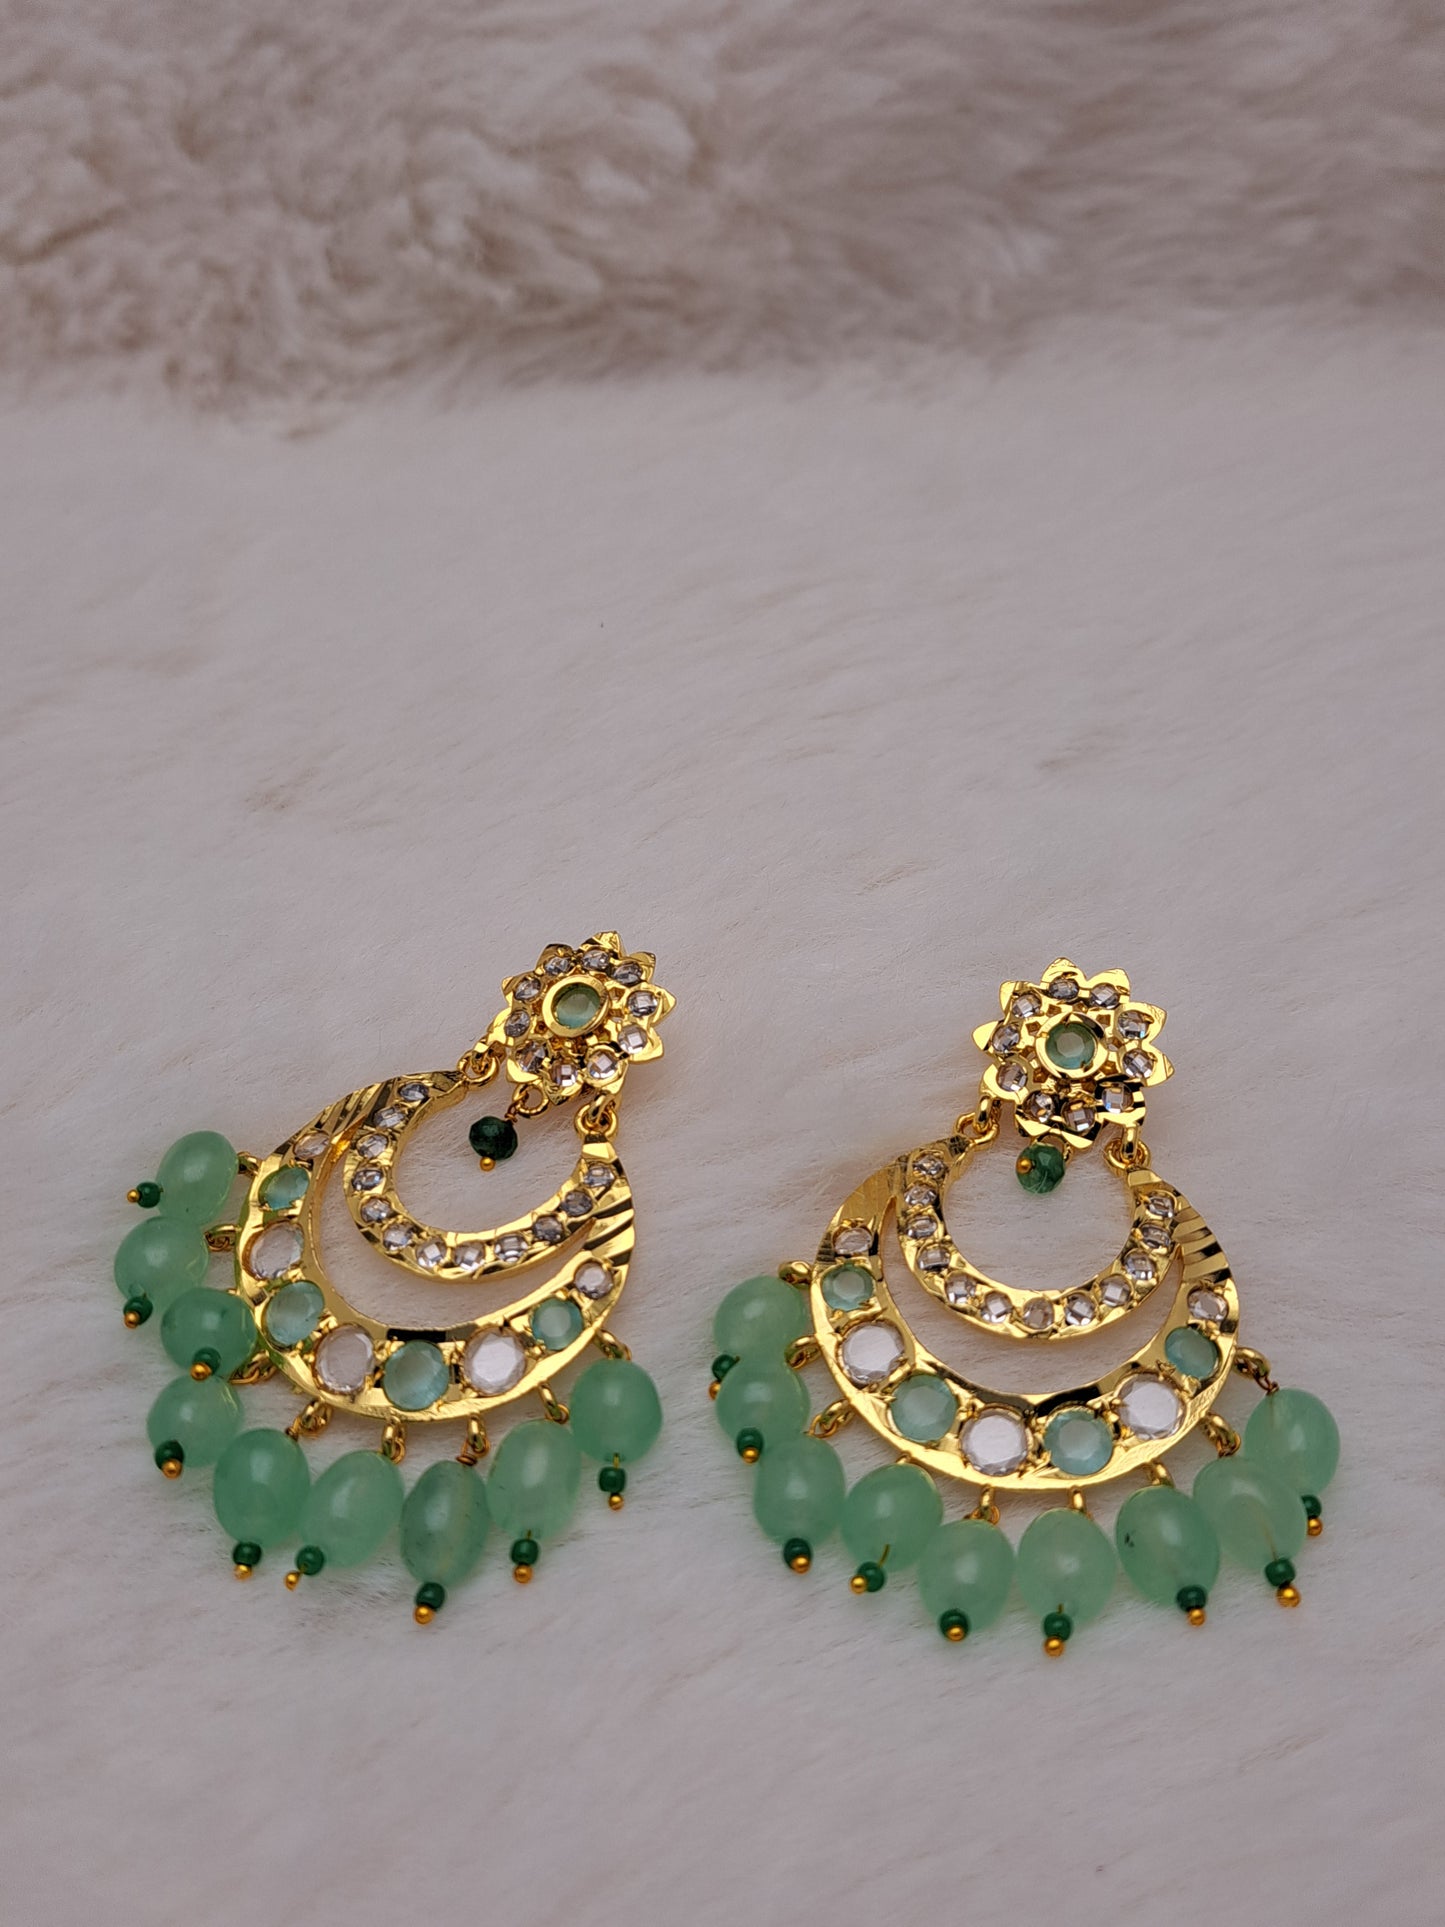 Hyderabadi double ring chand baali with polki and sea green color stones and awaze